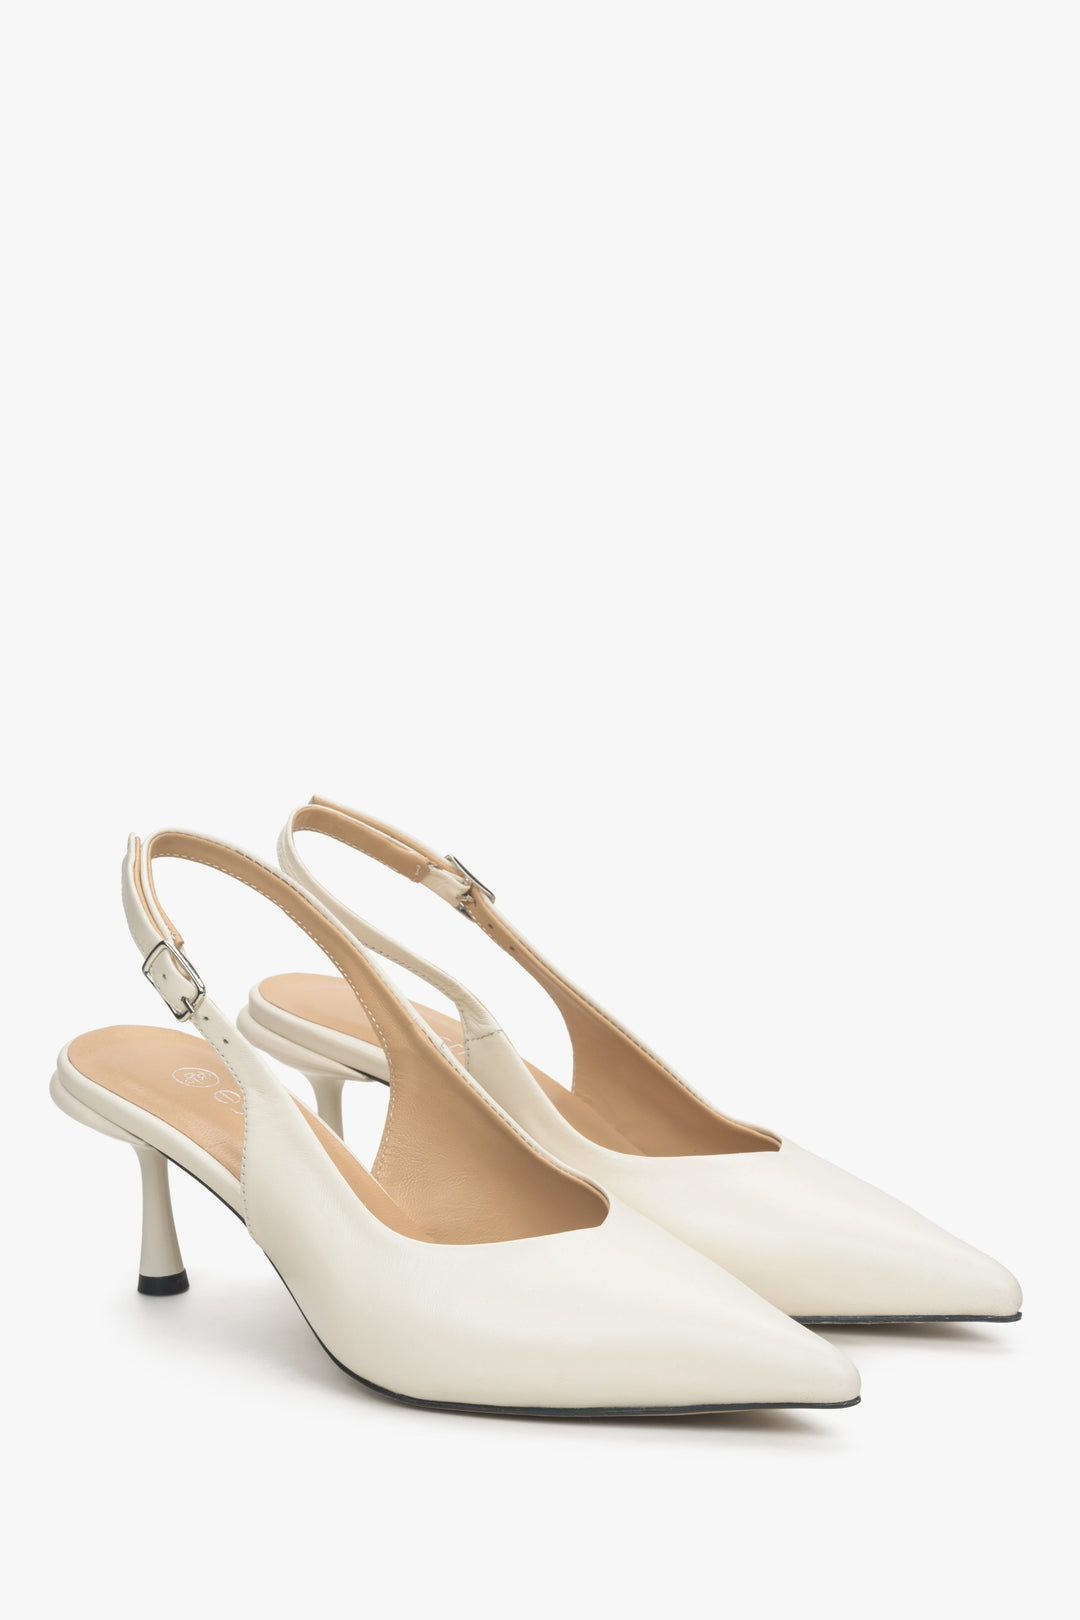 Women's white slingbacks made of genuine leather by Estro.